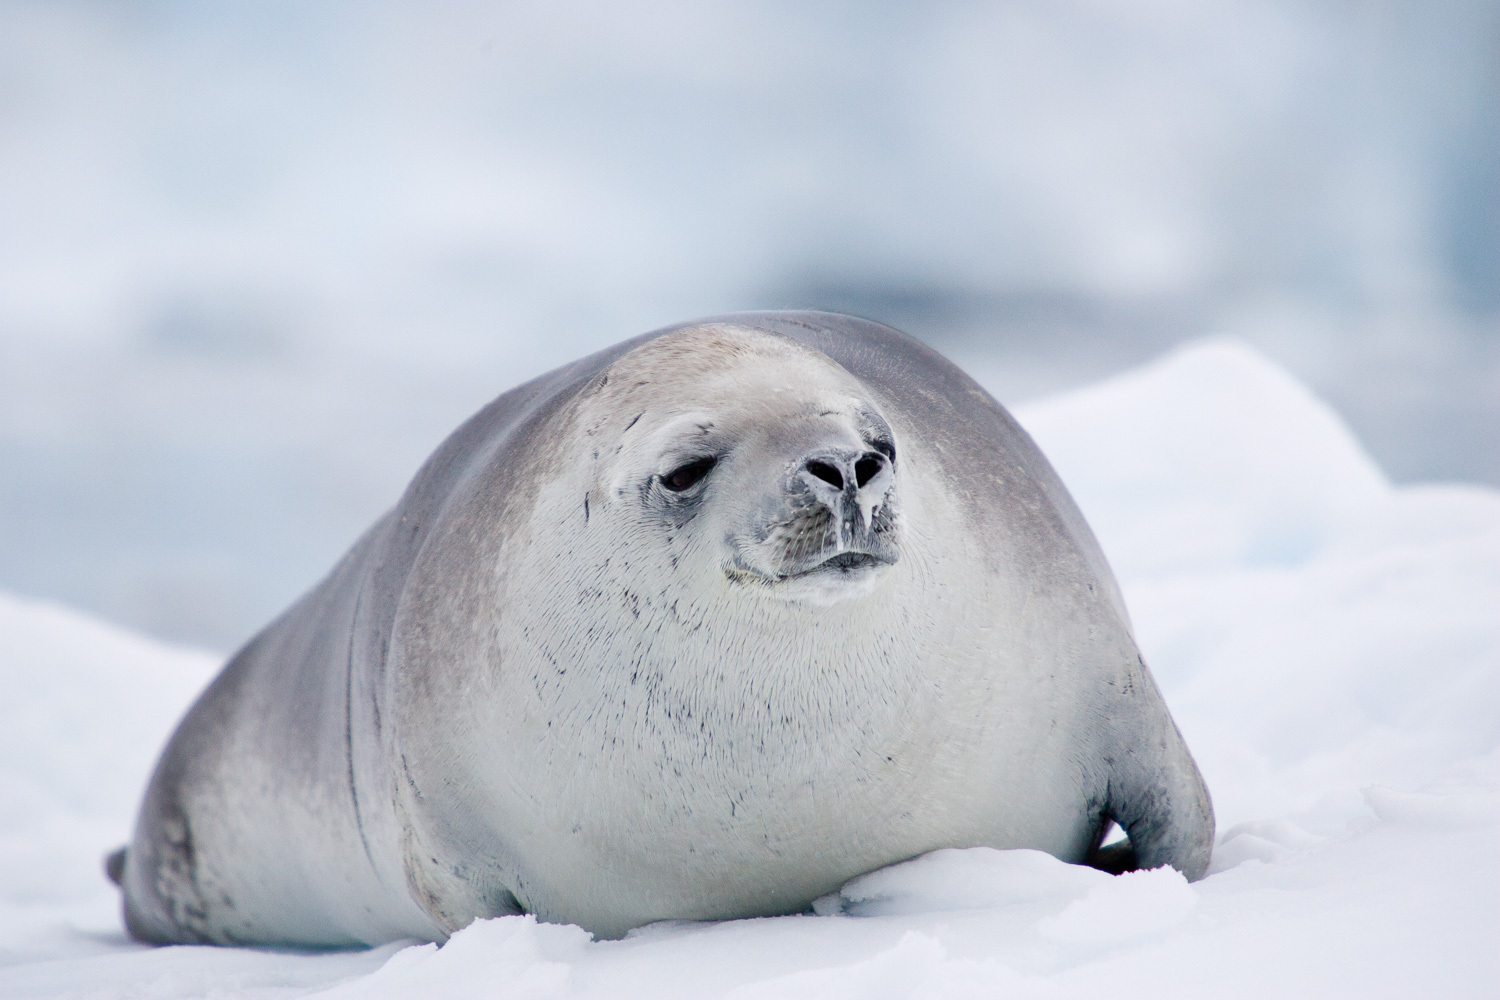 how did the crabeater seal get its name where does it come from and what does it eat